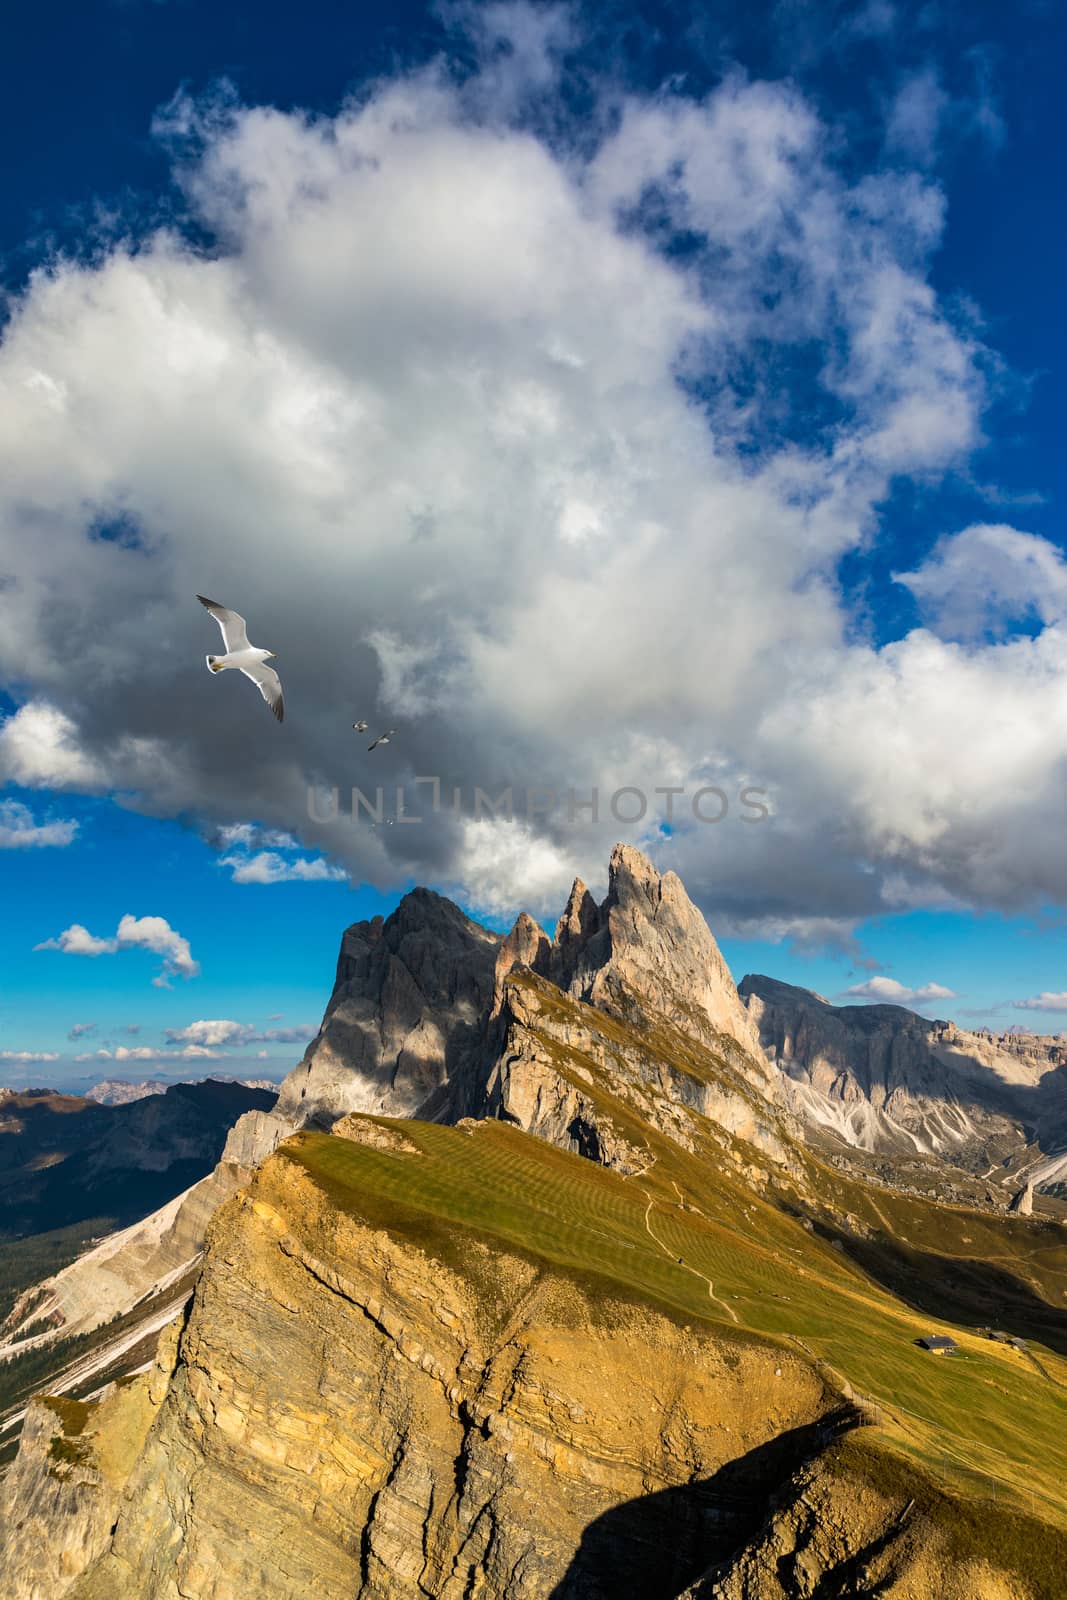 View on Seceda with birds flying over the peaks. Trentino Alto Adige, Dolomites Alps, South Tyrol, Italy. Val Gardena. Majestic Furchetta peak. Odles group seen from Seceda, Val Gardena.